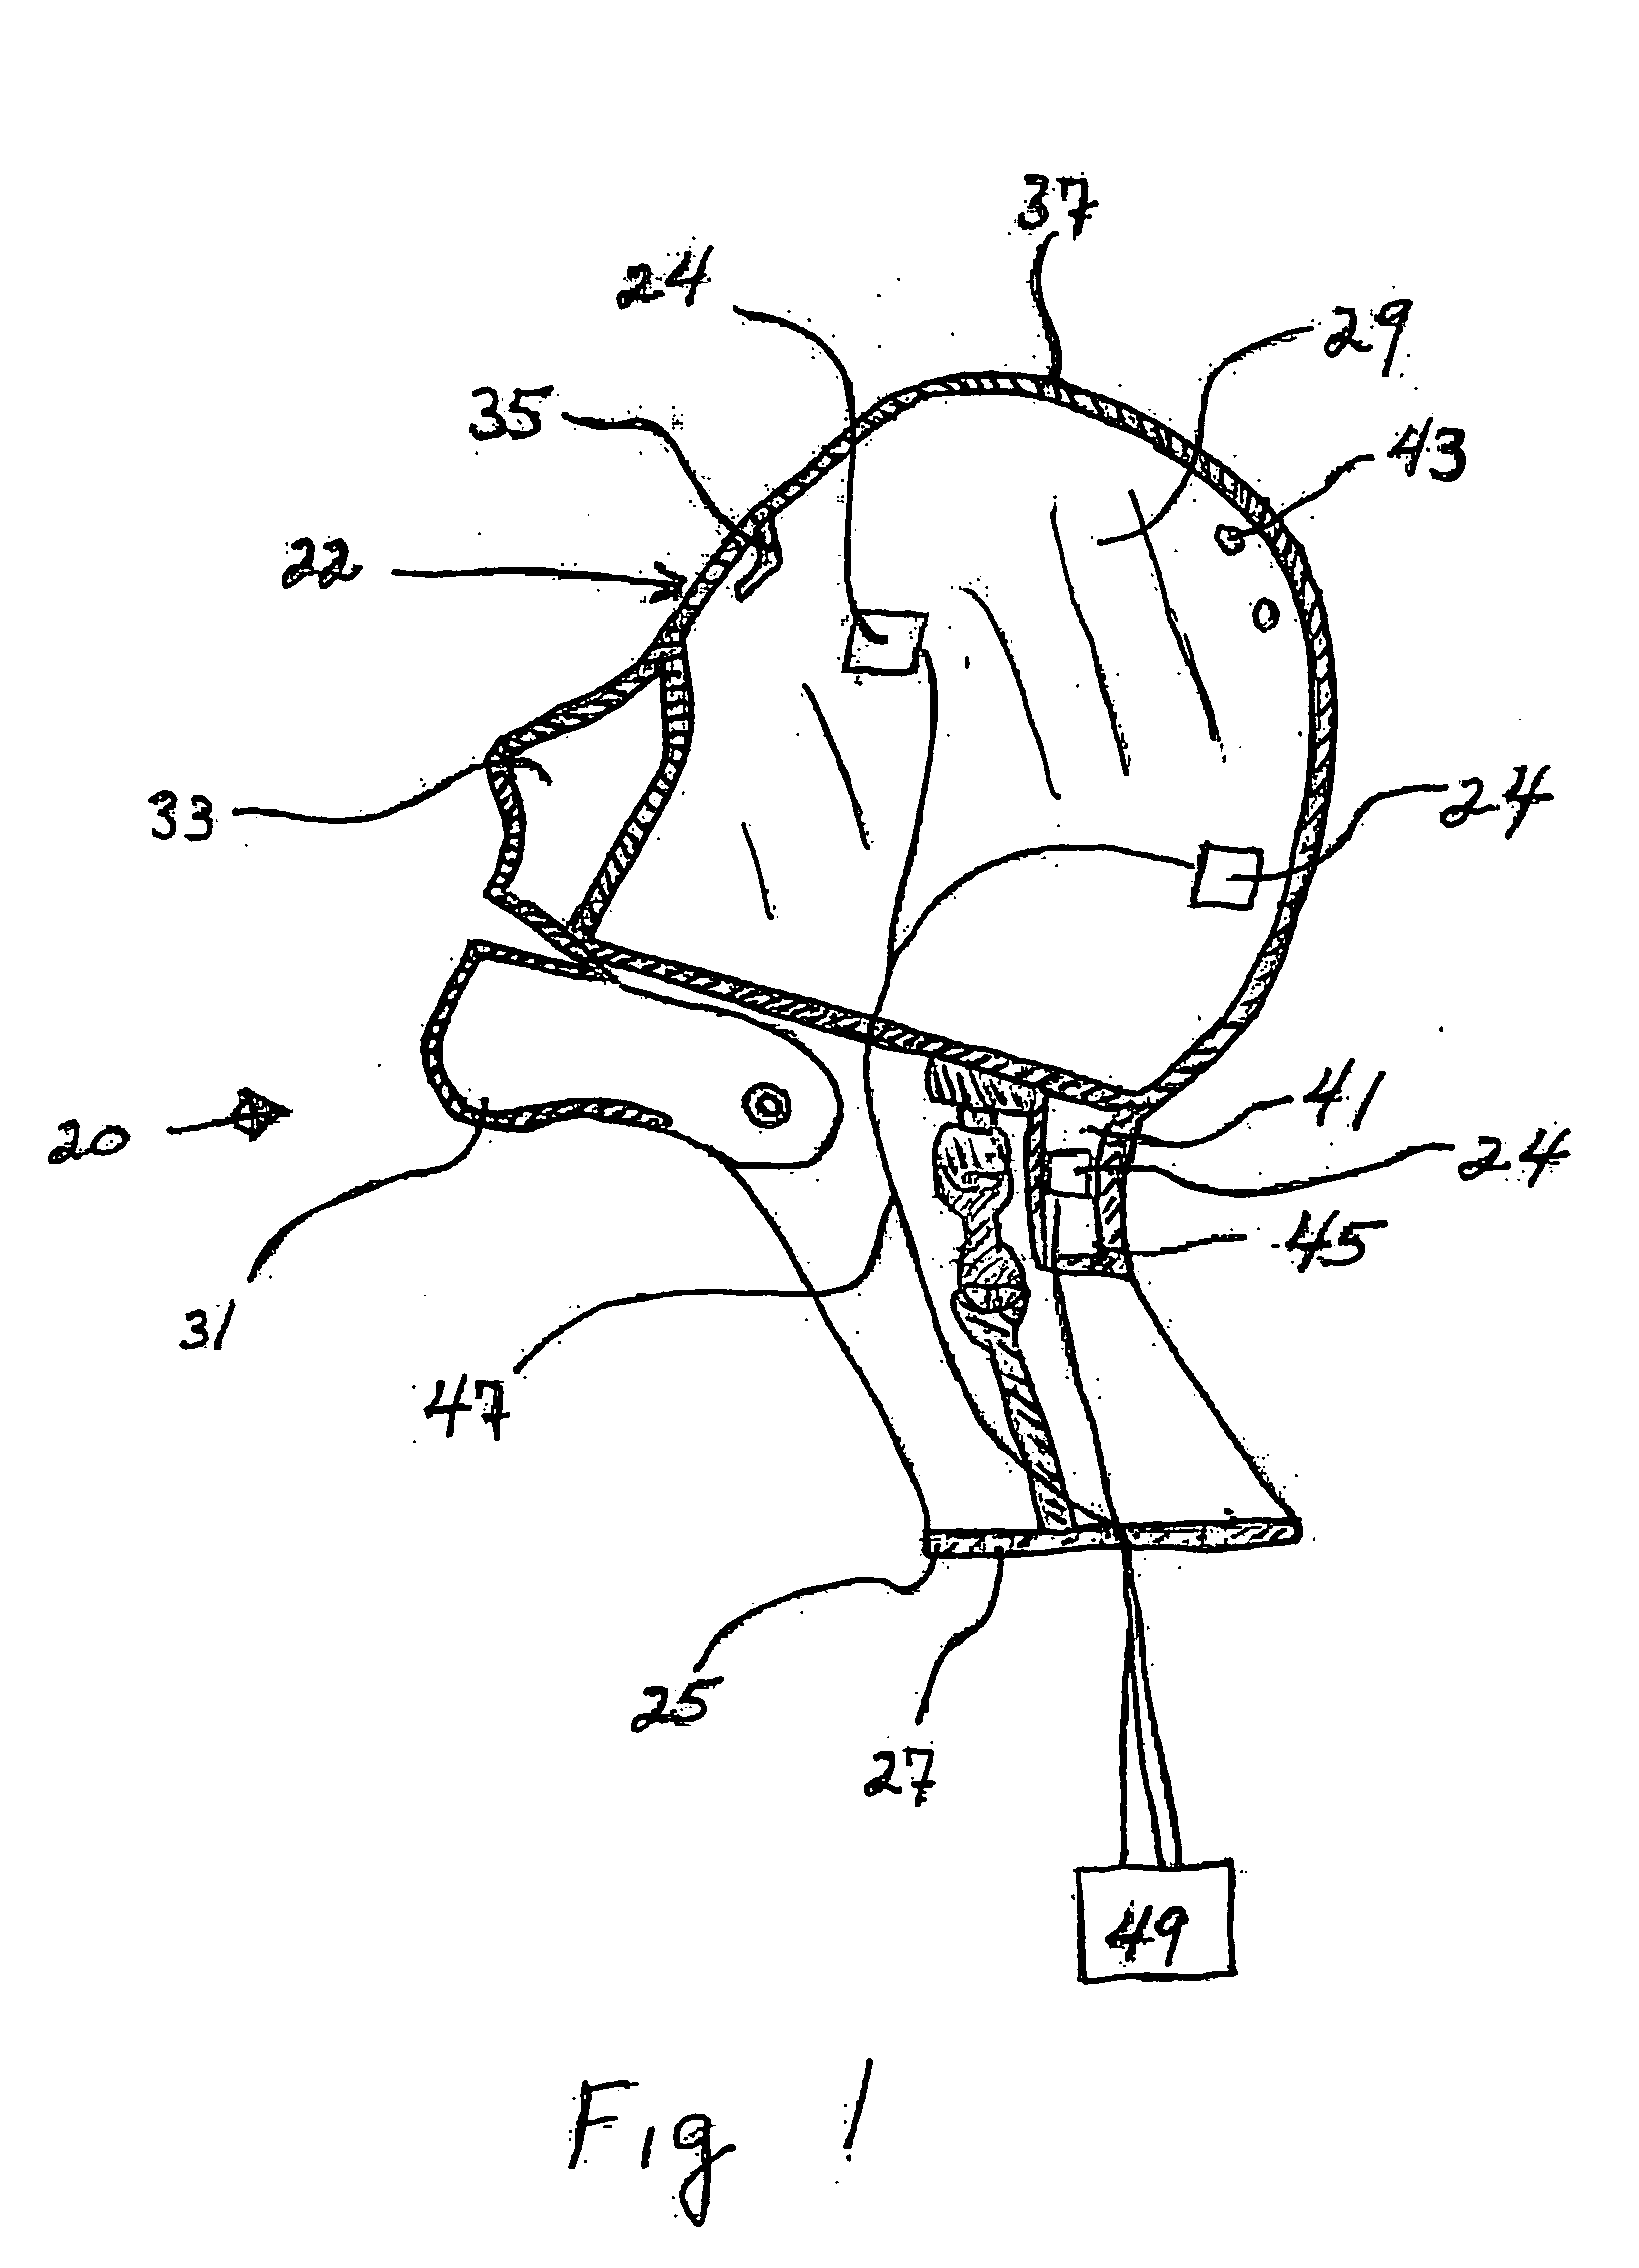 System for simulating cerebrospinal injury